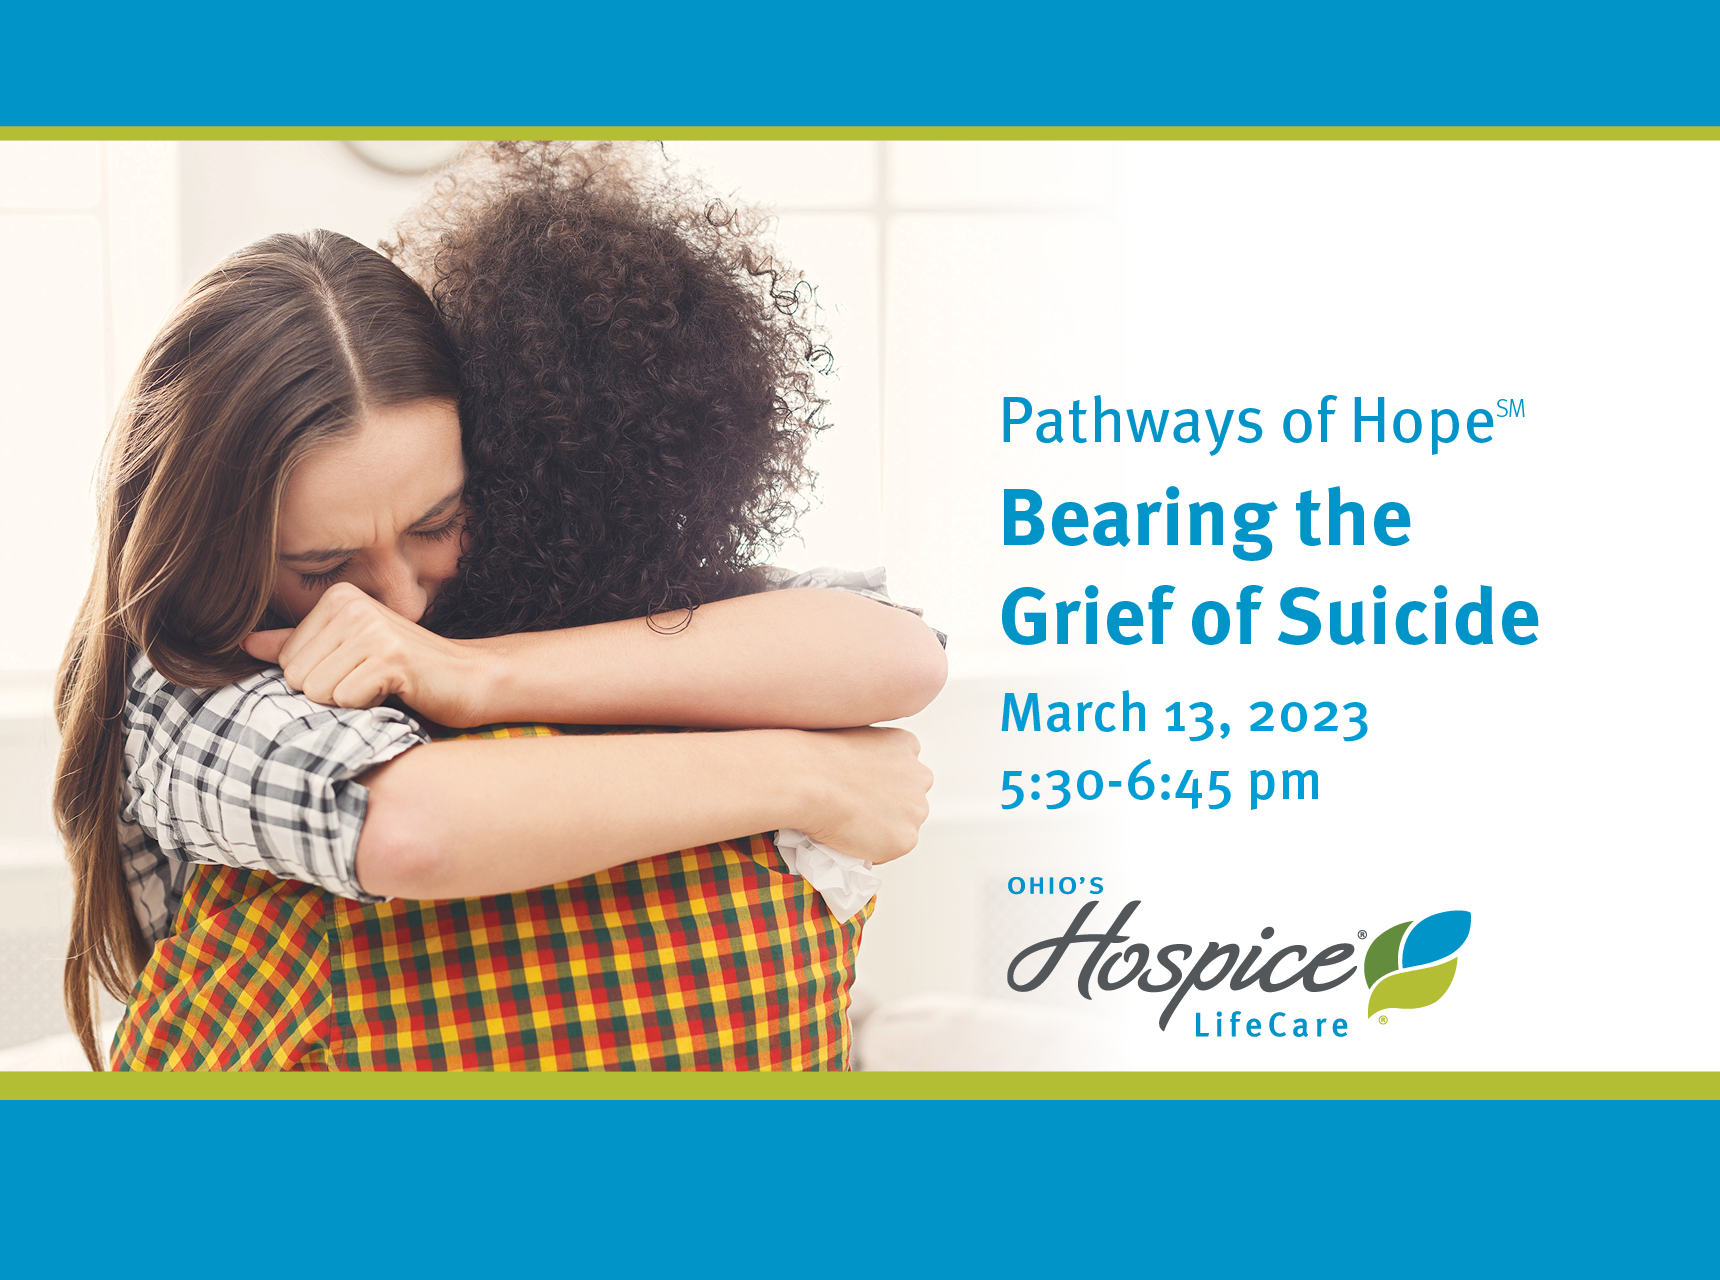 Pathways of Hope: Bearing the Grief of Suicide - March 13, 2023, - 5:30-6:45 pm